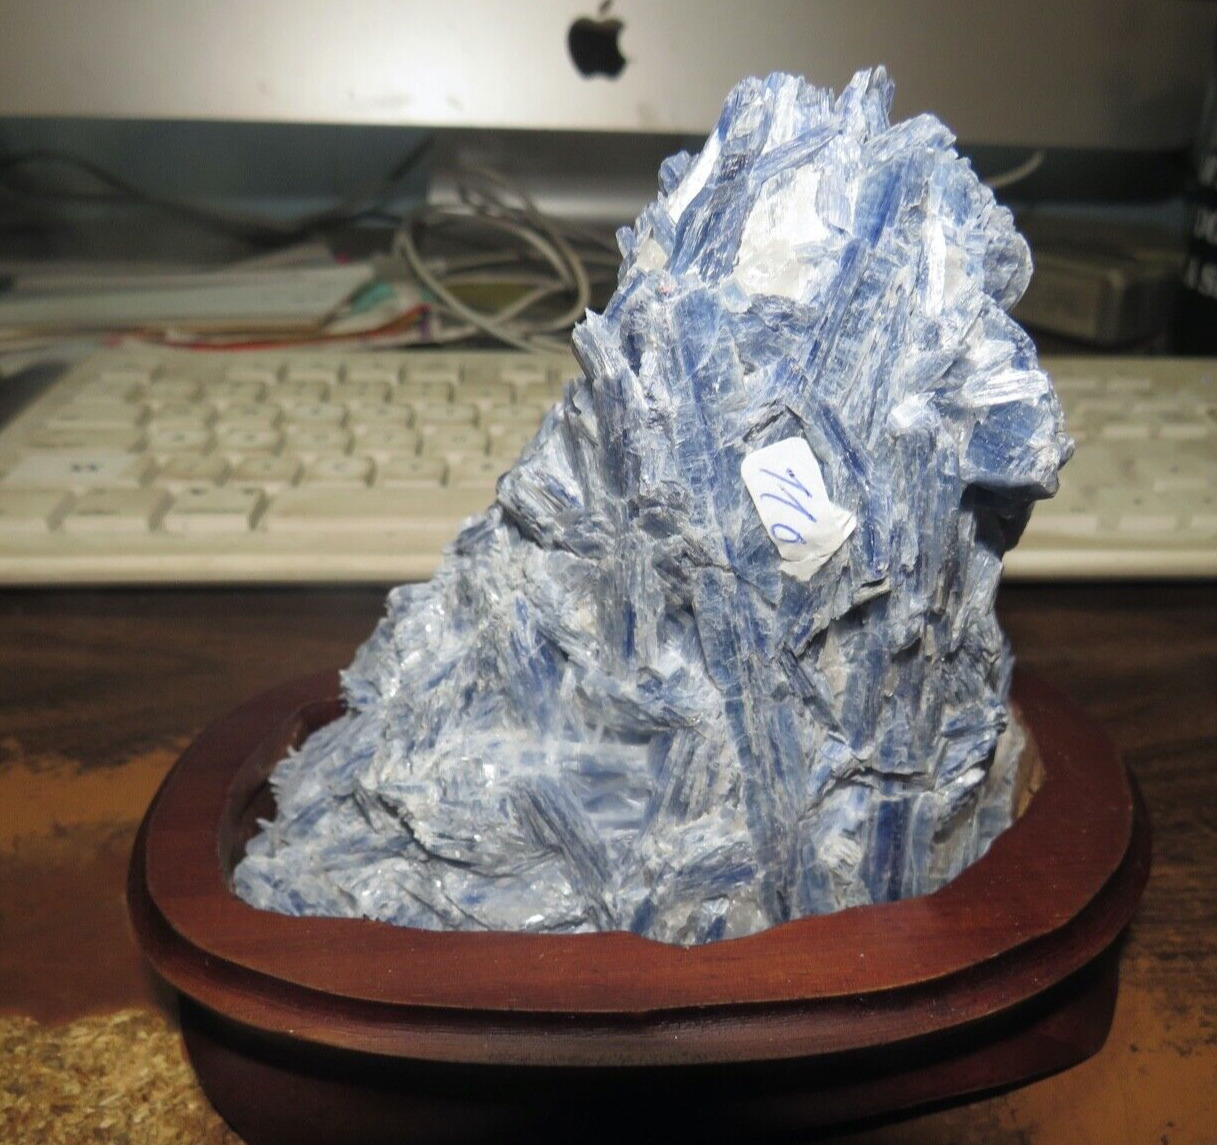 GORGEOUS LARGE SPECIMEN OF BLUE KYANITE IN A WOOD STAND